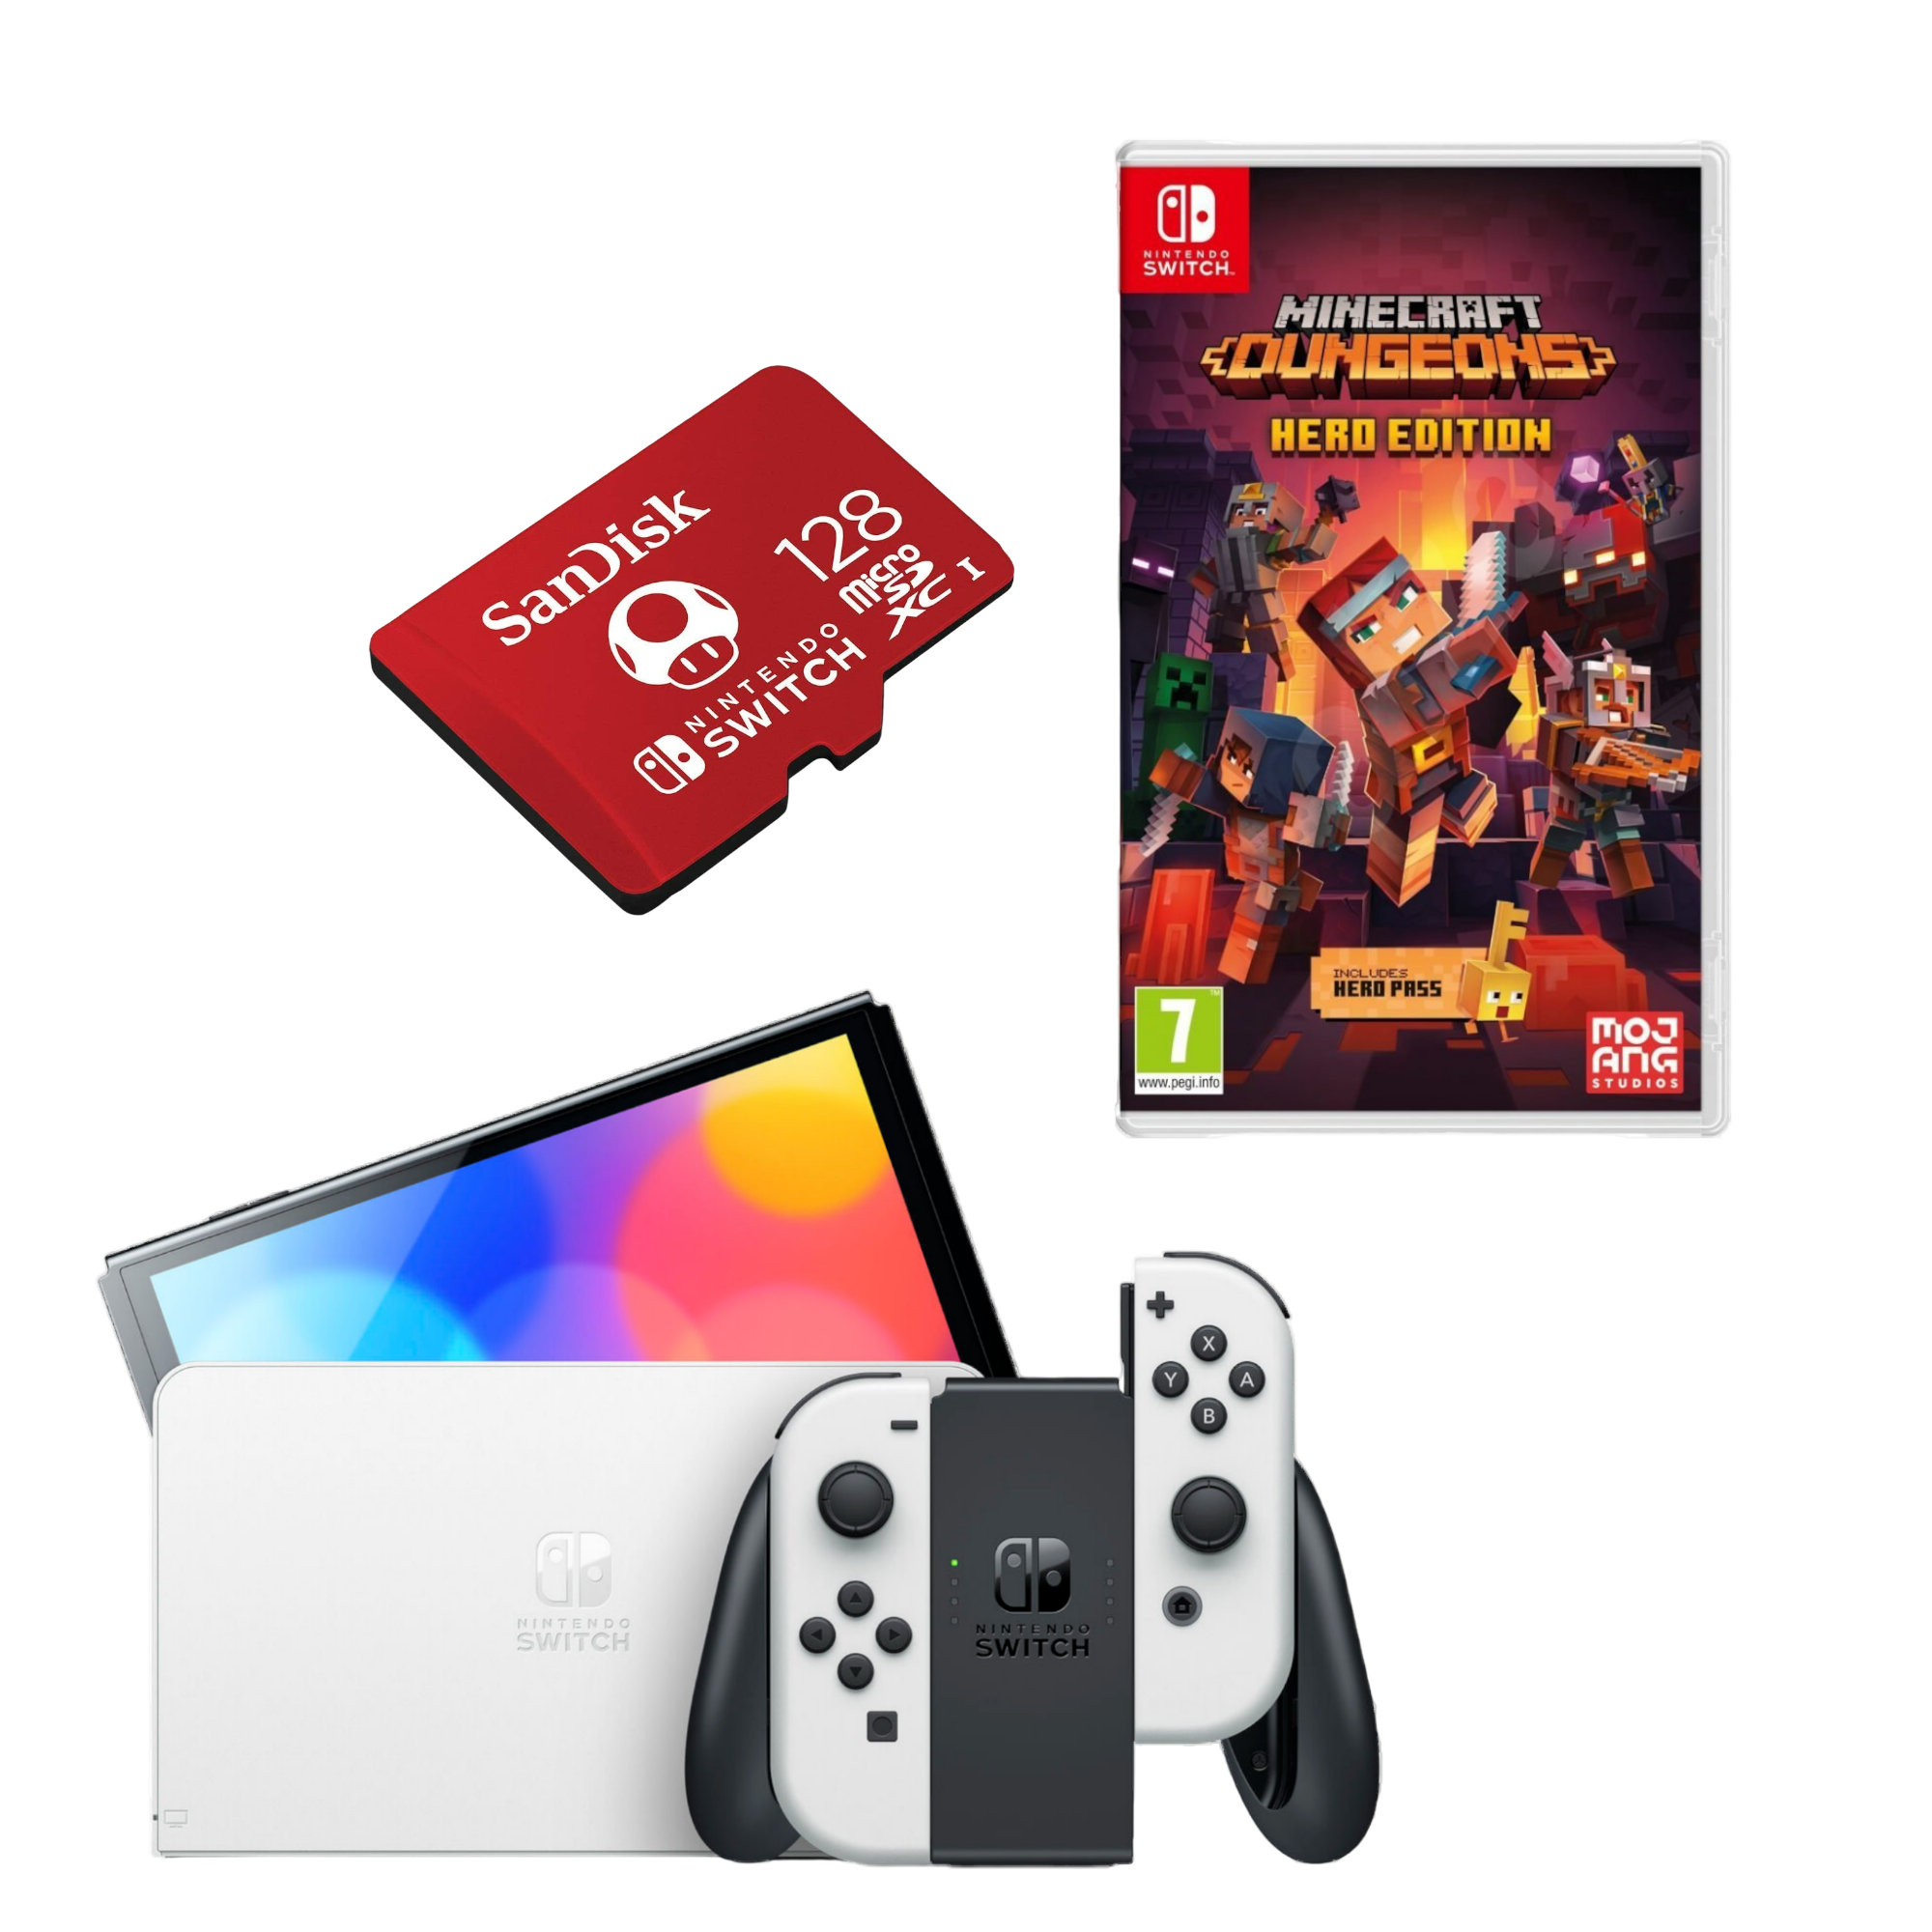 Nintendo Switch OLED Console White with Sandisk 128GB MicroSD Card, Minecraft Dungeons Hero Edition and Screen Cleaning Cloth - Pro-Distributing